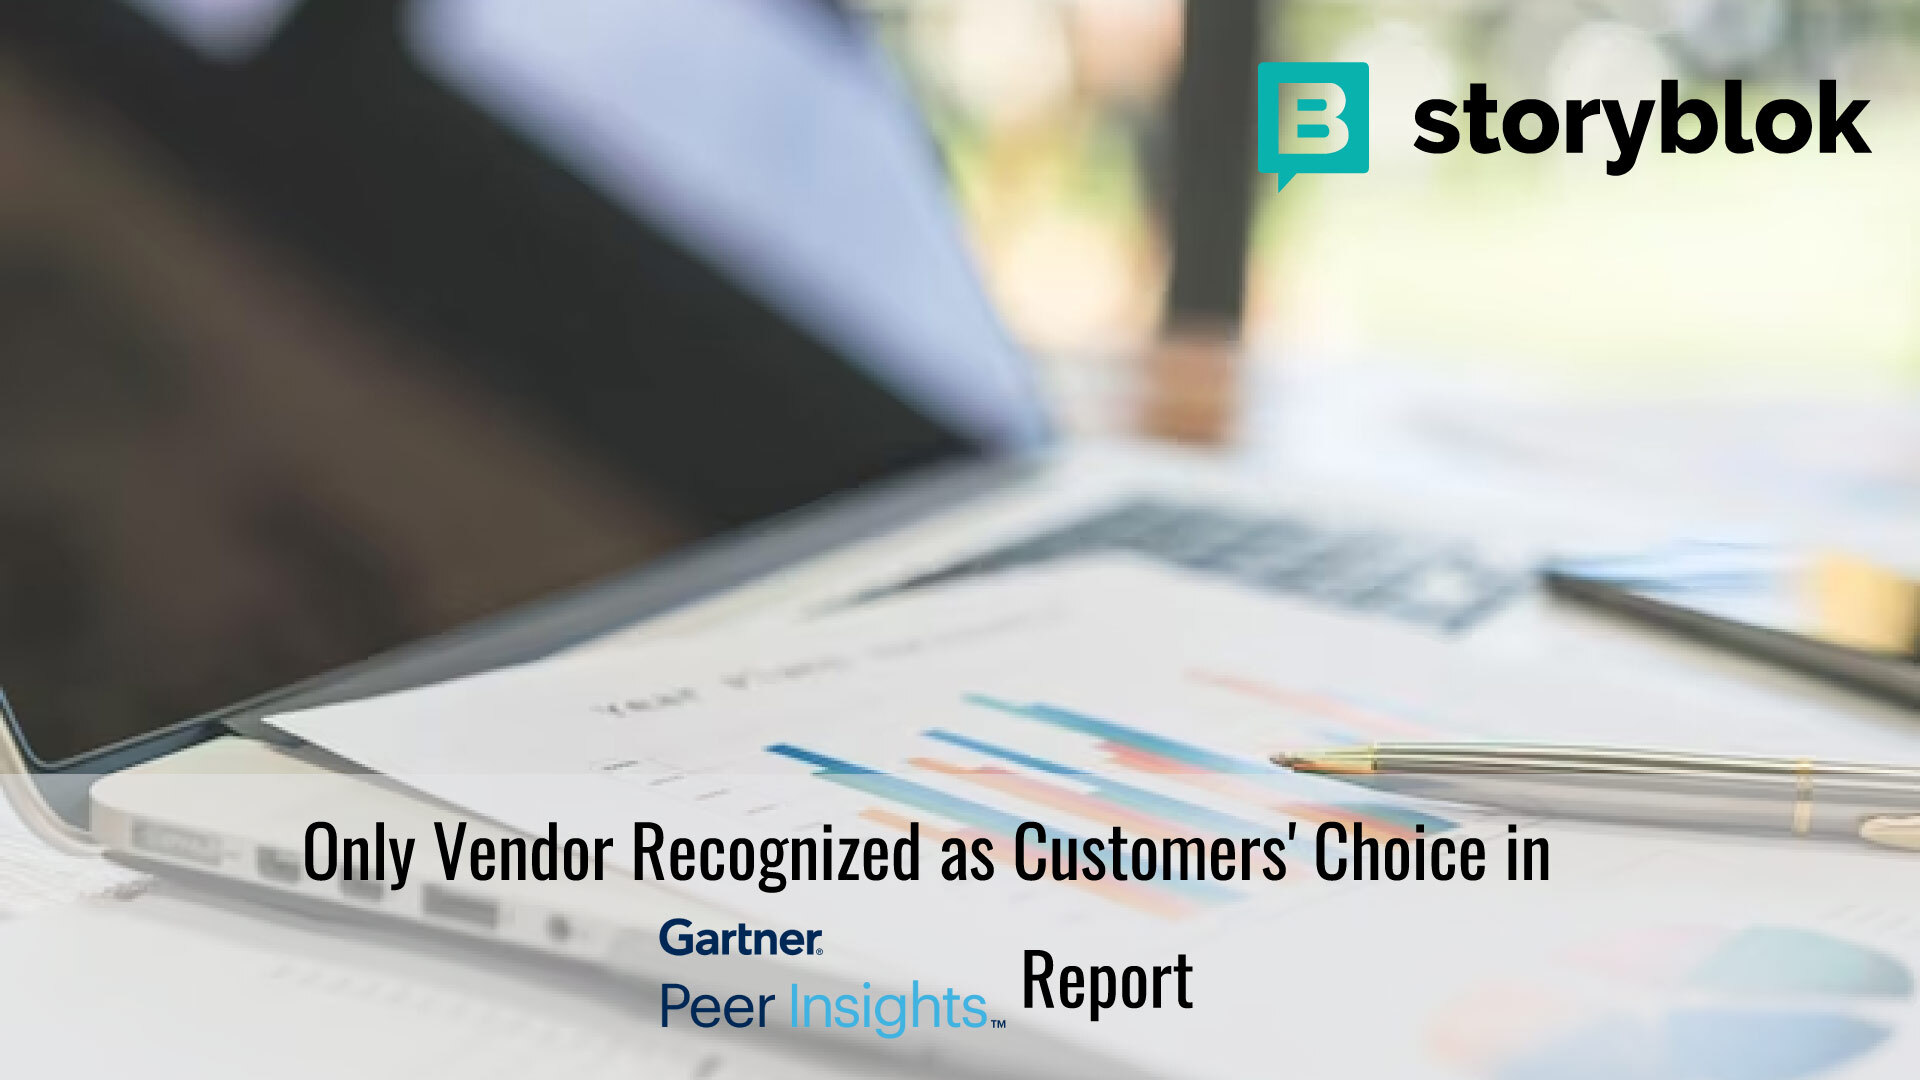 Storyblok is the only vendor recognized as a Customers' Choice in Gartner® Peer Insights™ report